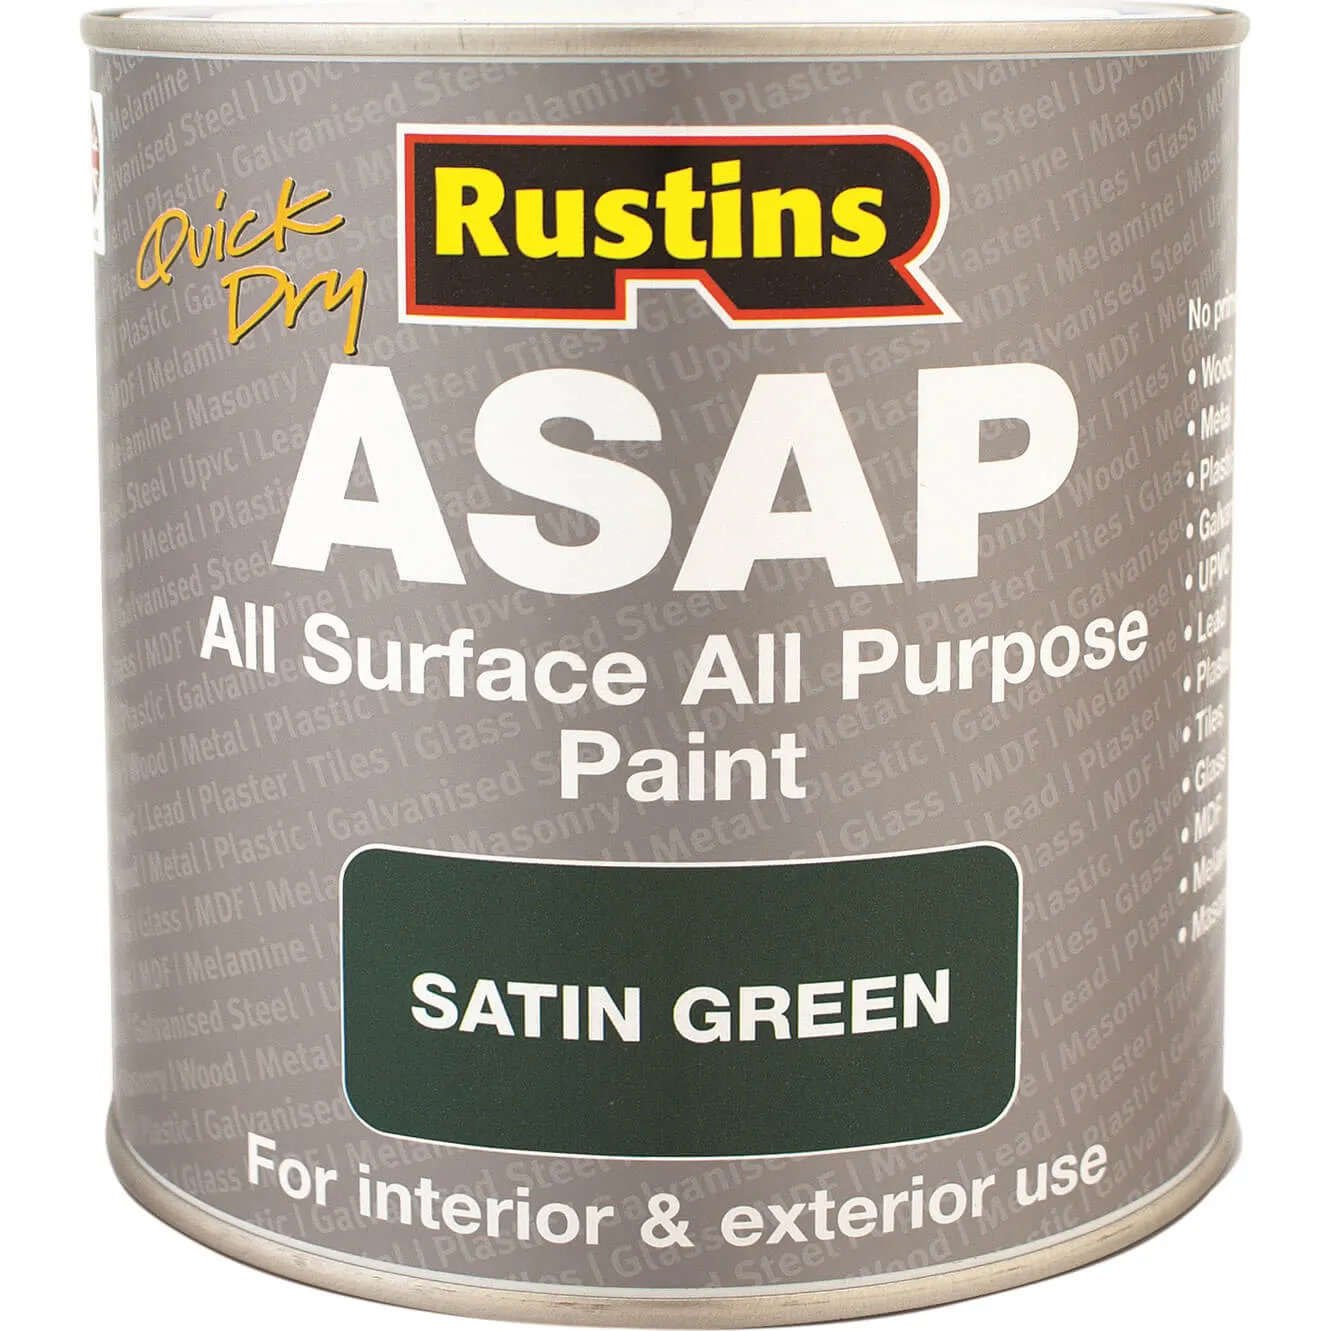 Rustins ASAP All Surface All Purpose Paint - Green, 250ml